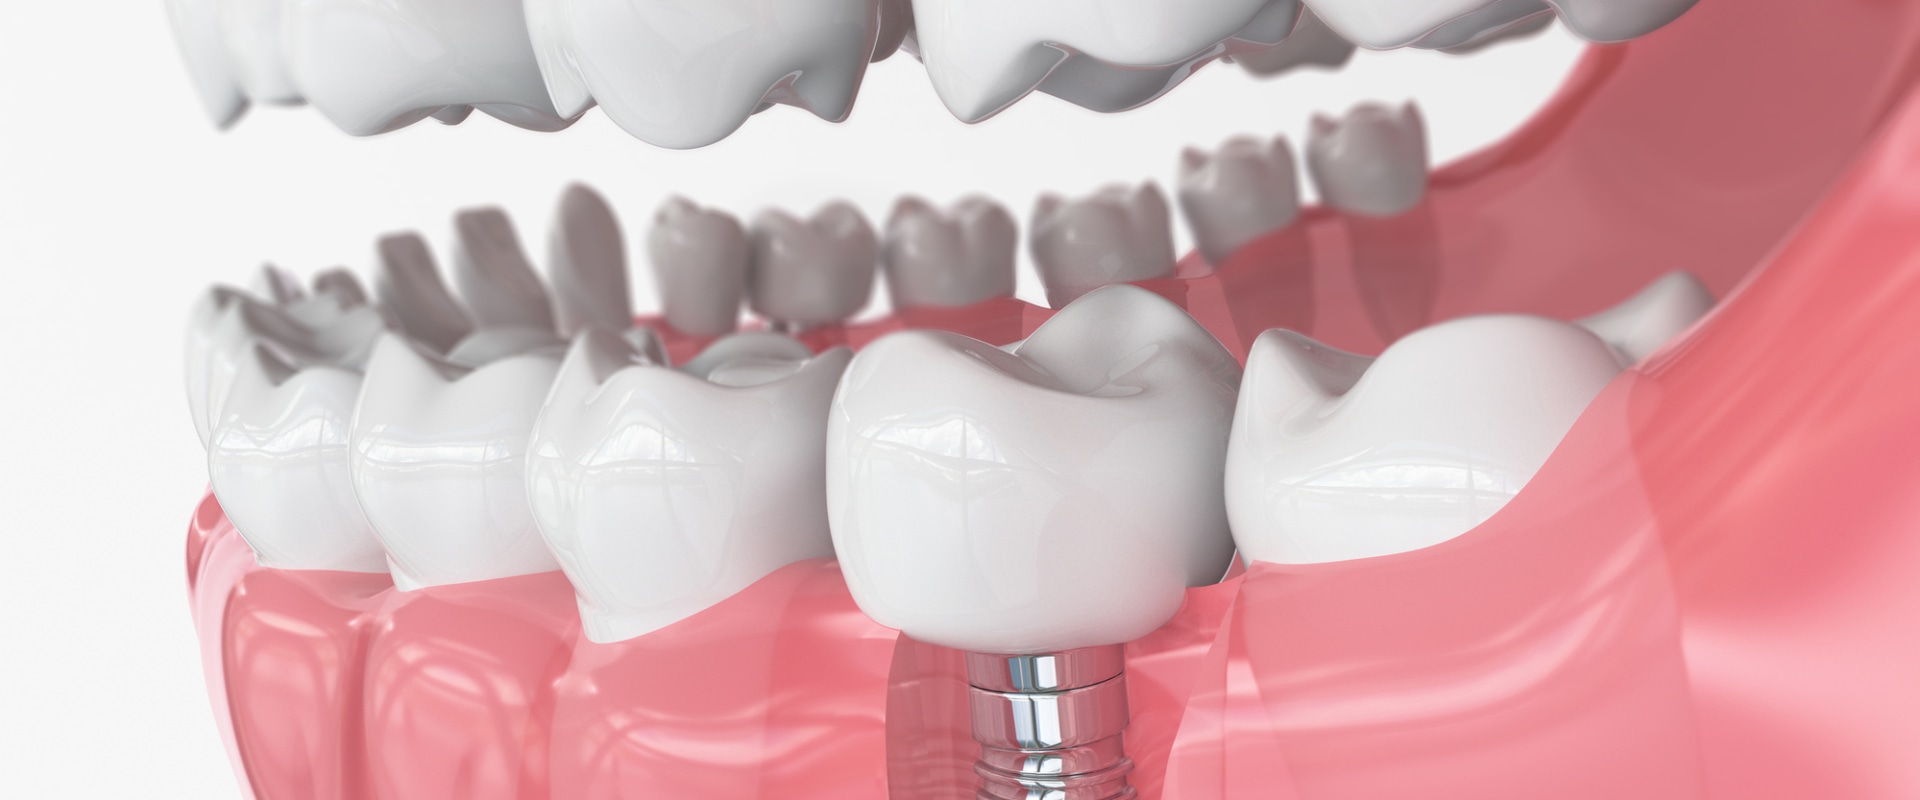 What are the 3 types of dental implants?